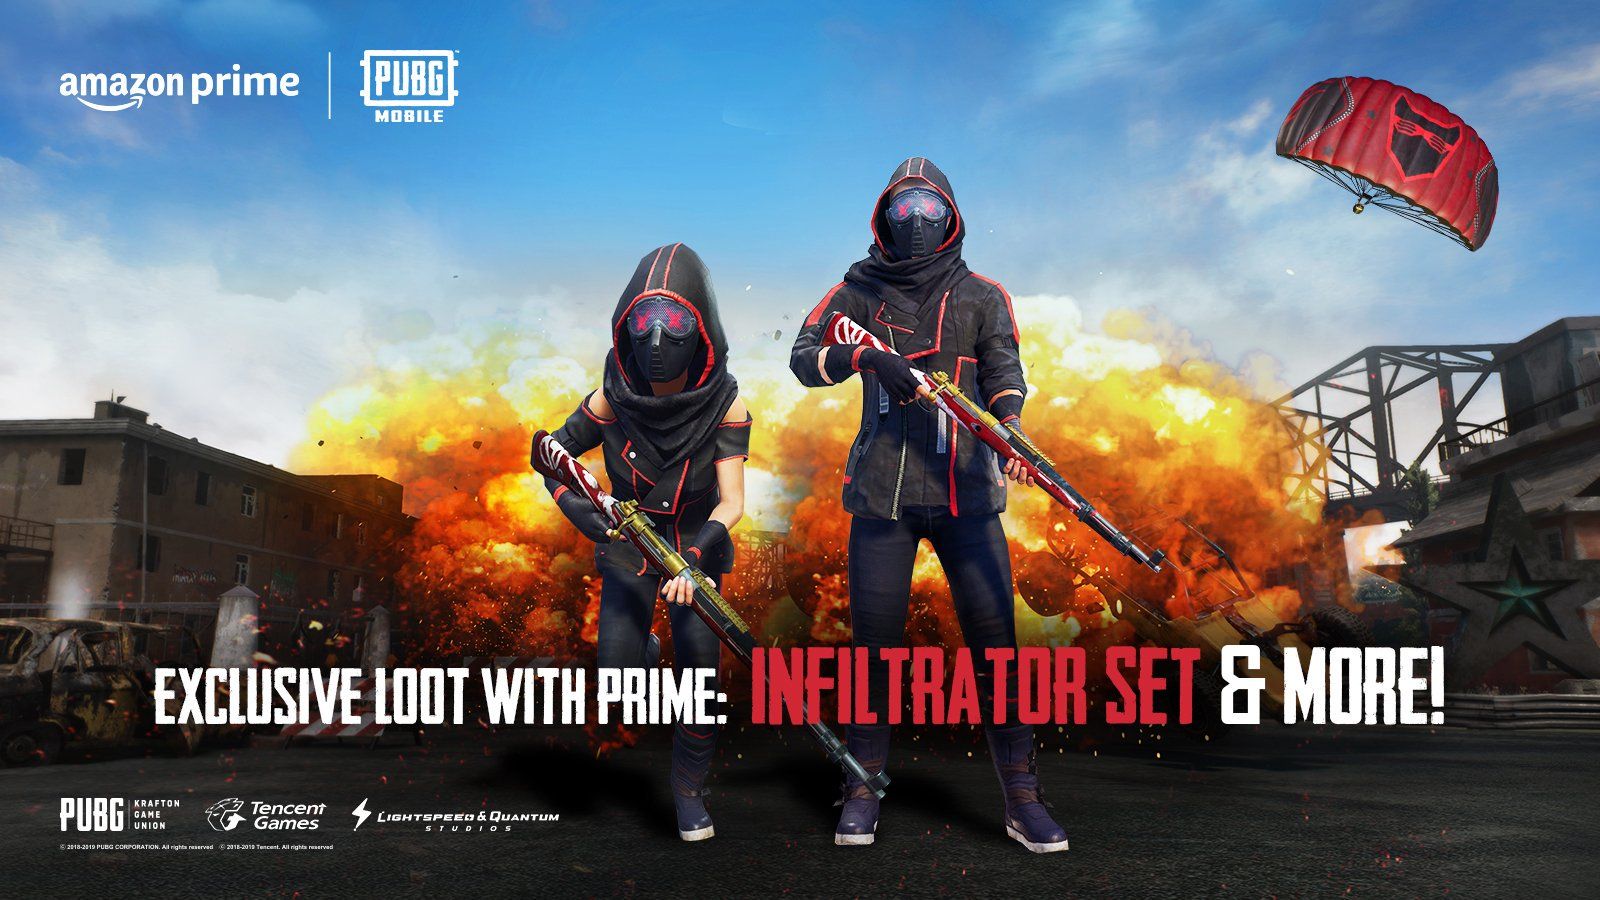 Here's How to Claim the Amazon Prime PUBG Mobile Reward Items